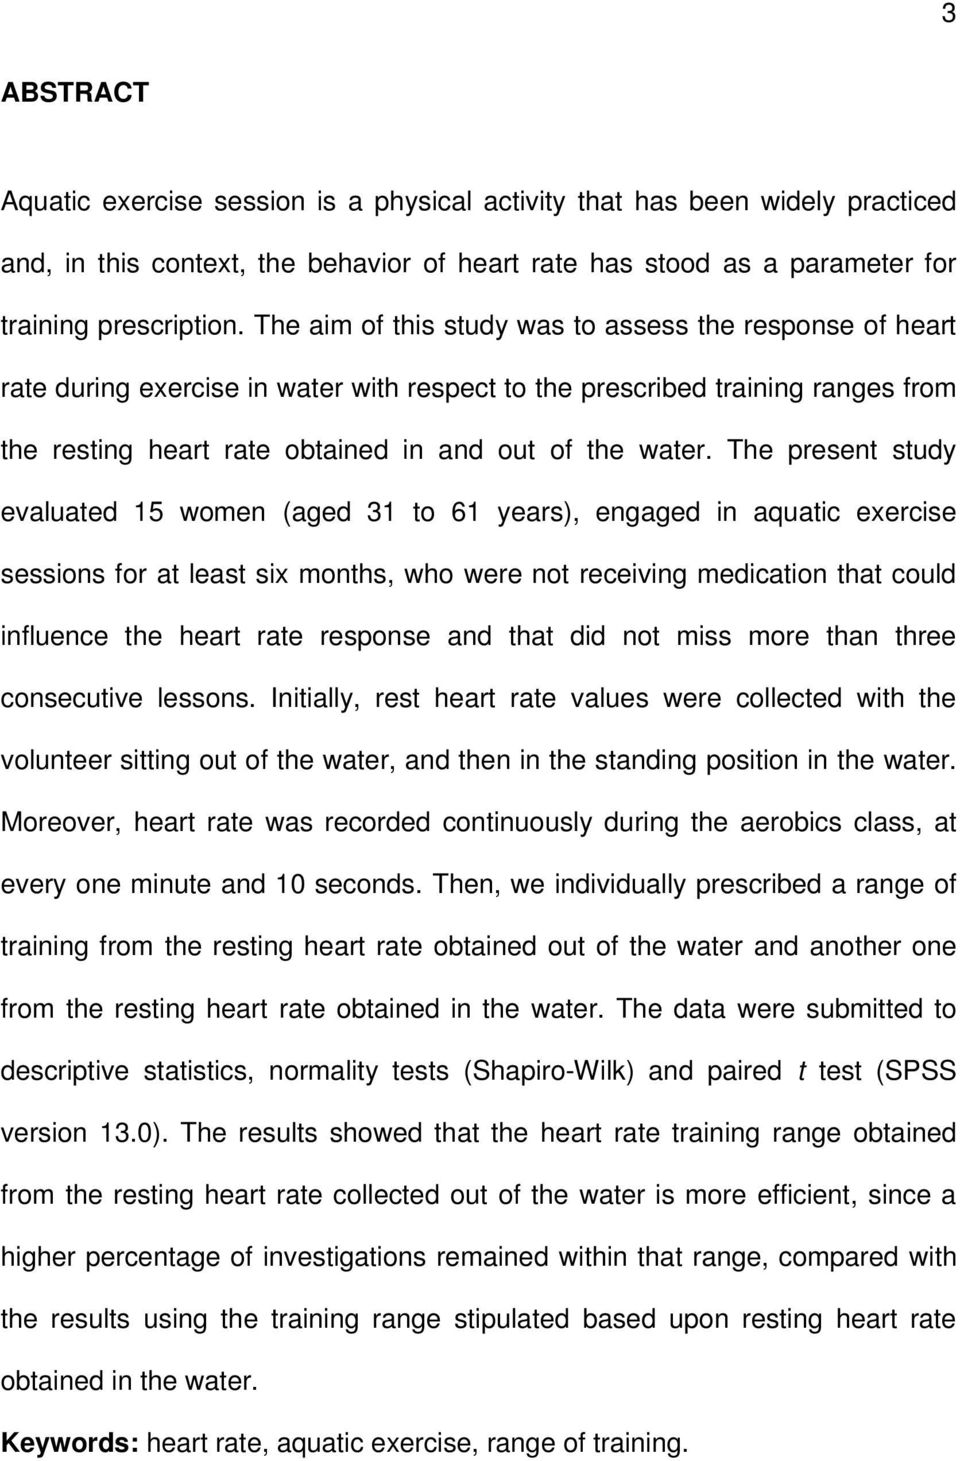 The present study evaluated 15 women (aged 31 to 61 years), engaged in aquatic exercise sessions for at least six months, who were not receiving medication that could influence the heart rate